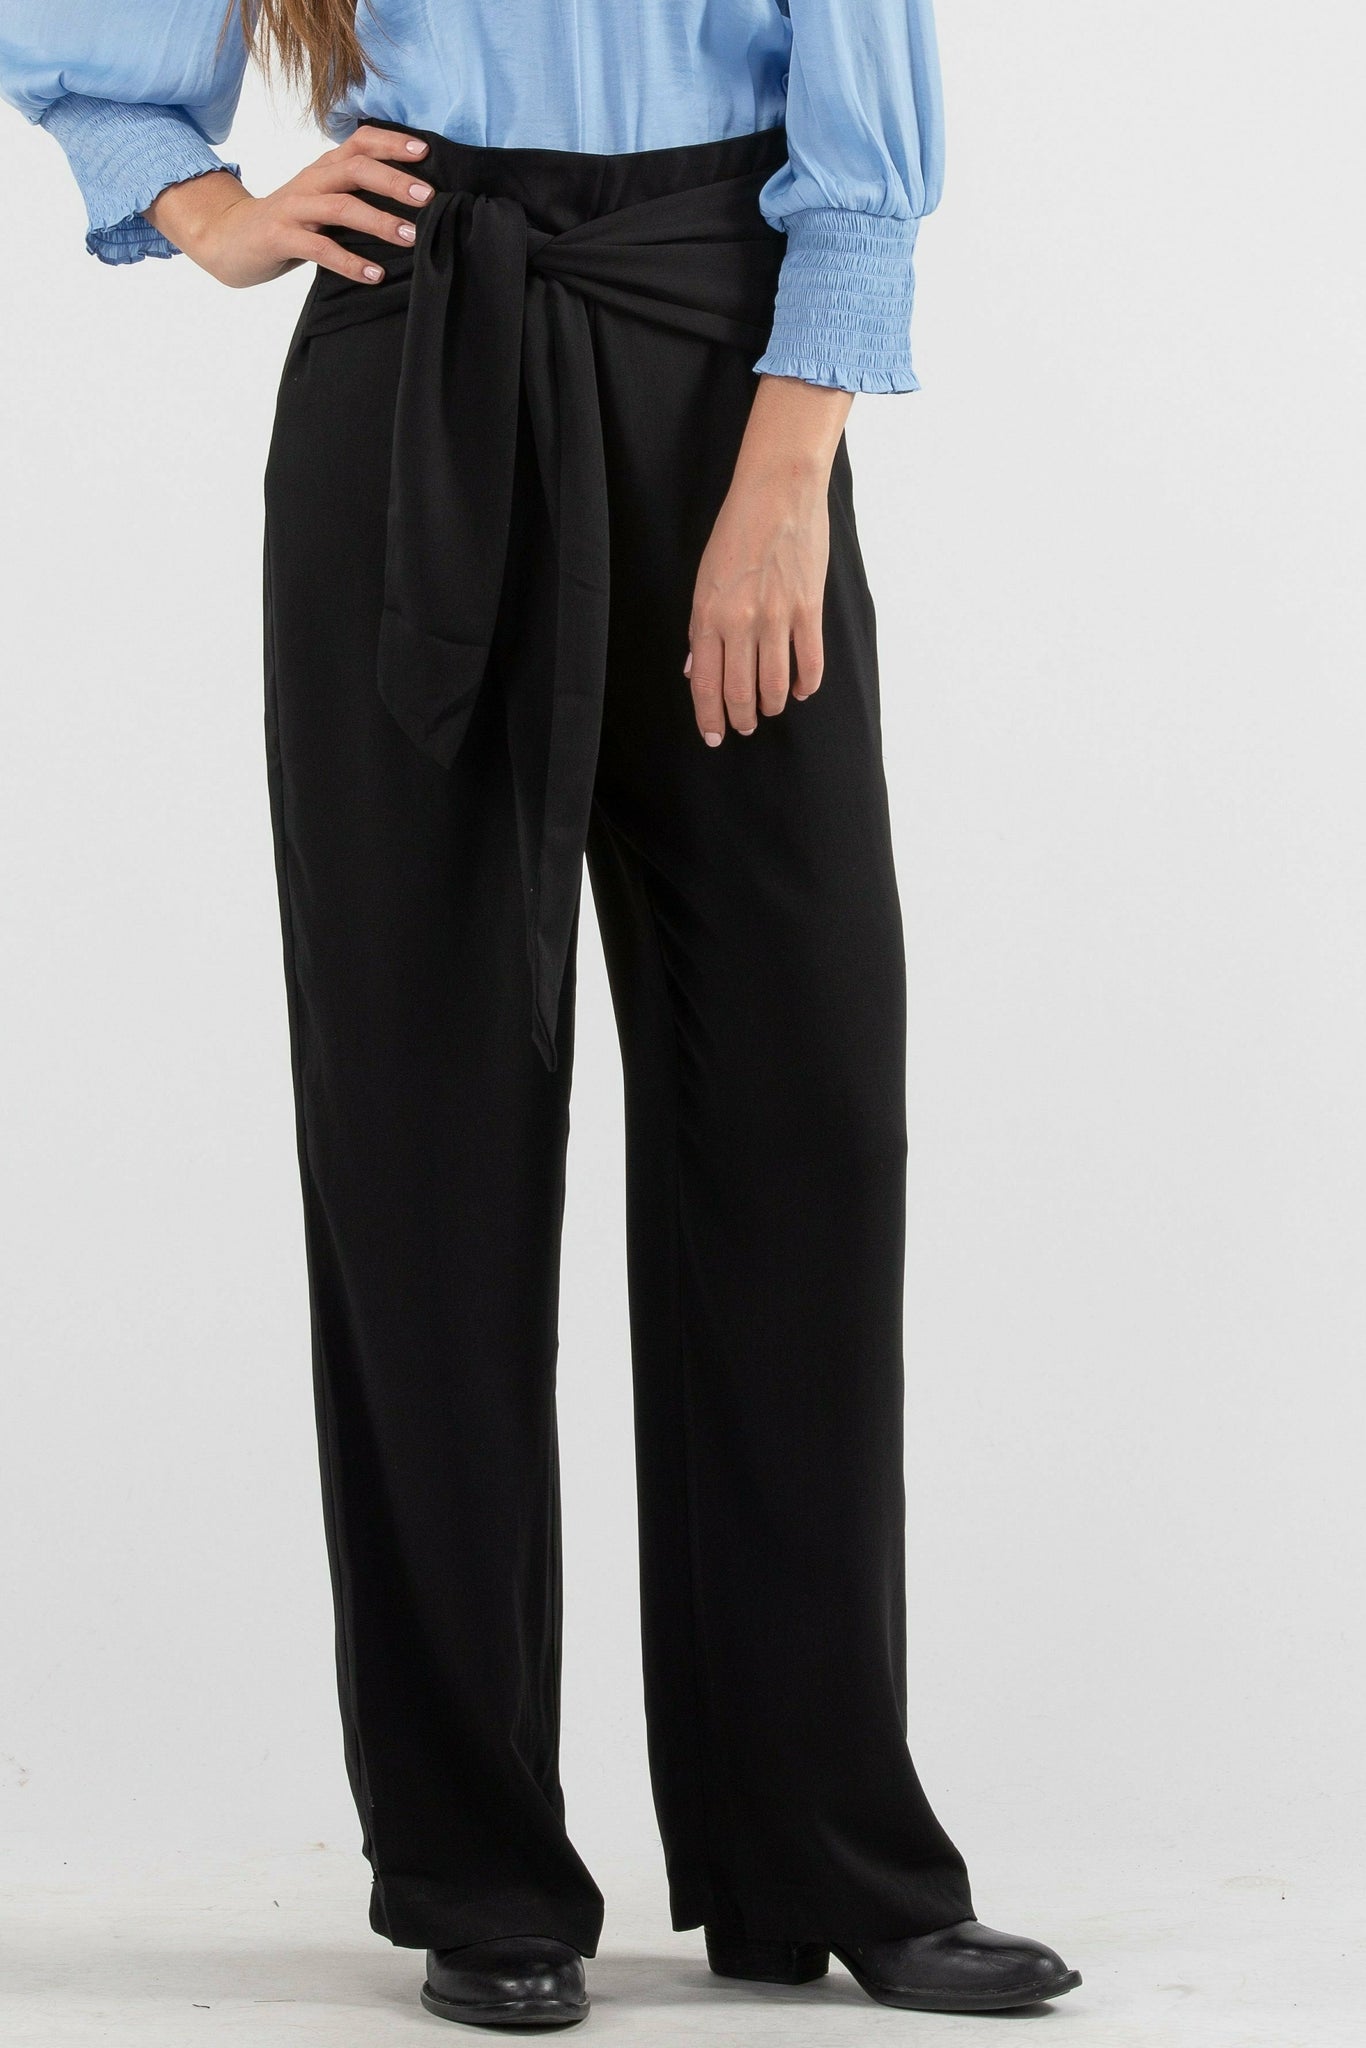 The Tailored Ponte Trouser | Women's Sustainable Wide Leg Pant | Encircled